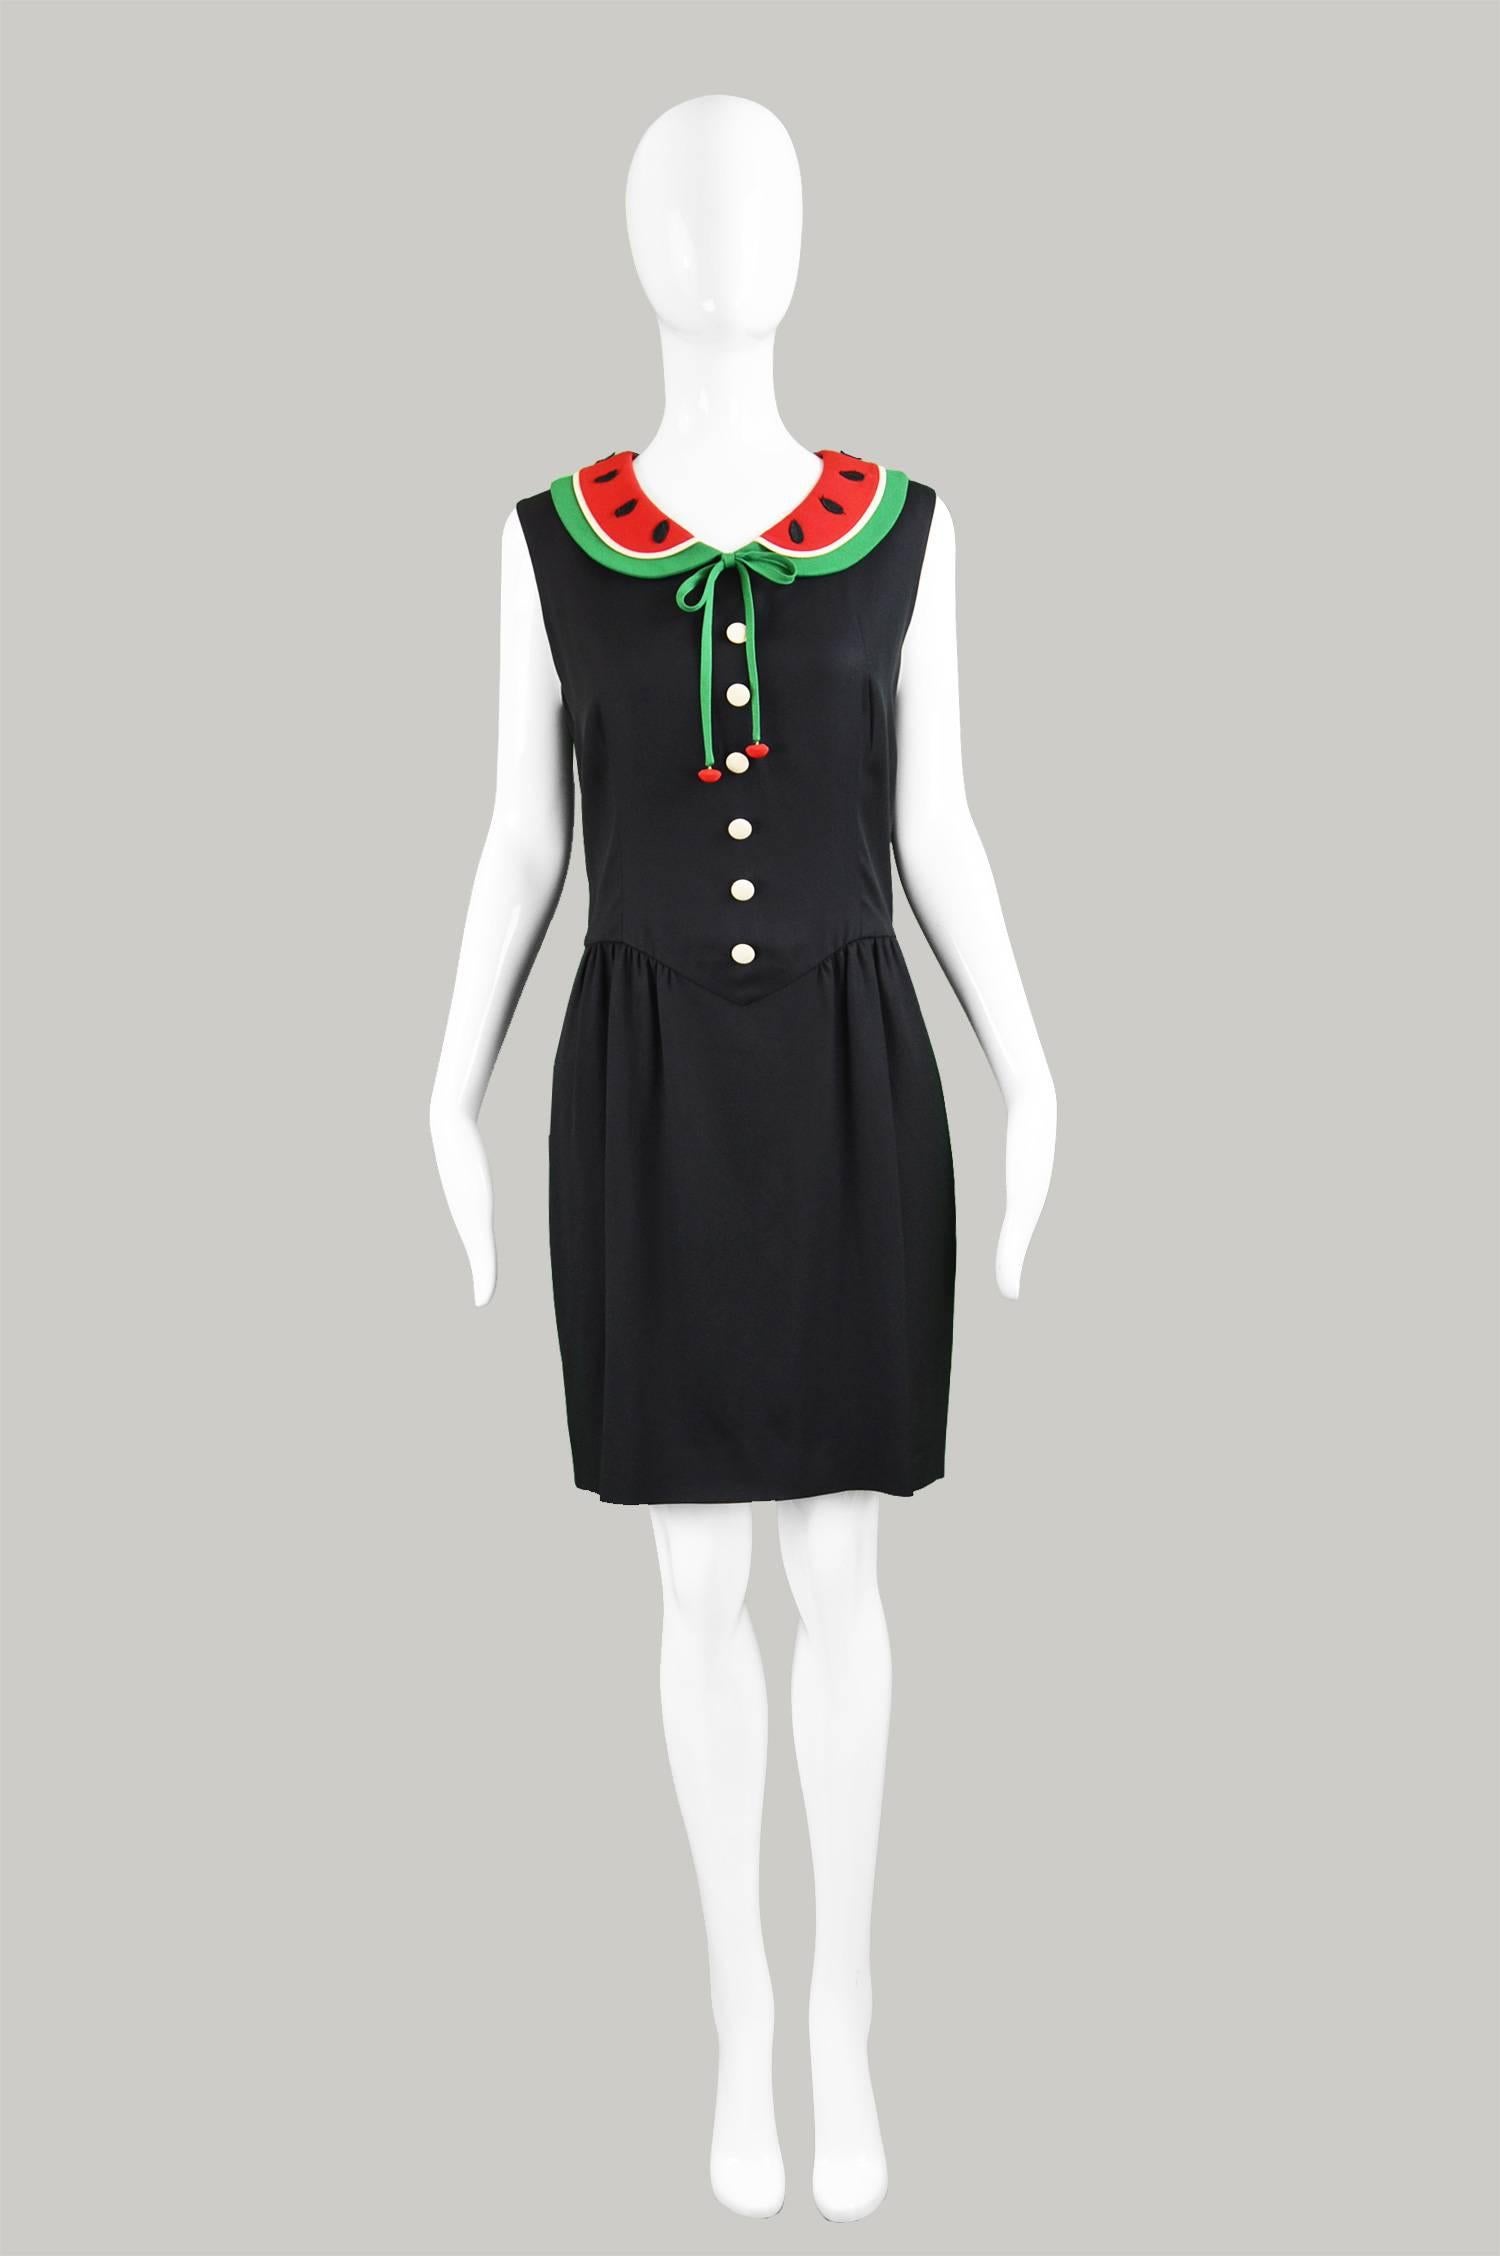 A fun and whimsical vintage Moschino dress from the 90s by genius Italian designer Moschino, for the highly collectable Cheap and Chic line. In a black crepe with off-white covered buttons and a watermelon style peter pan collar with embroidered